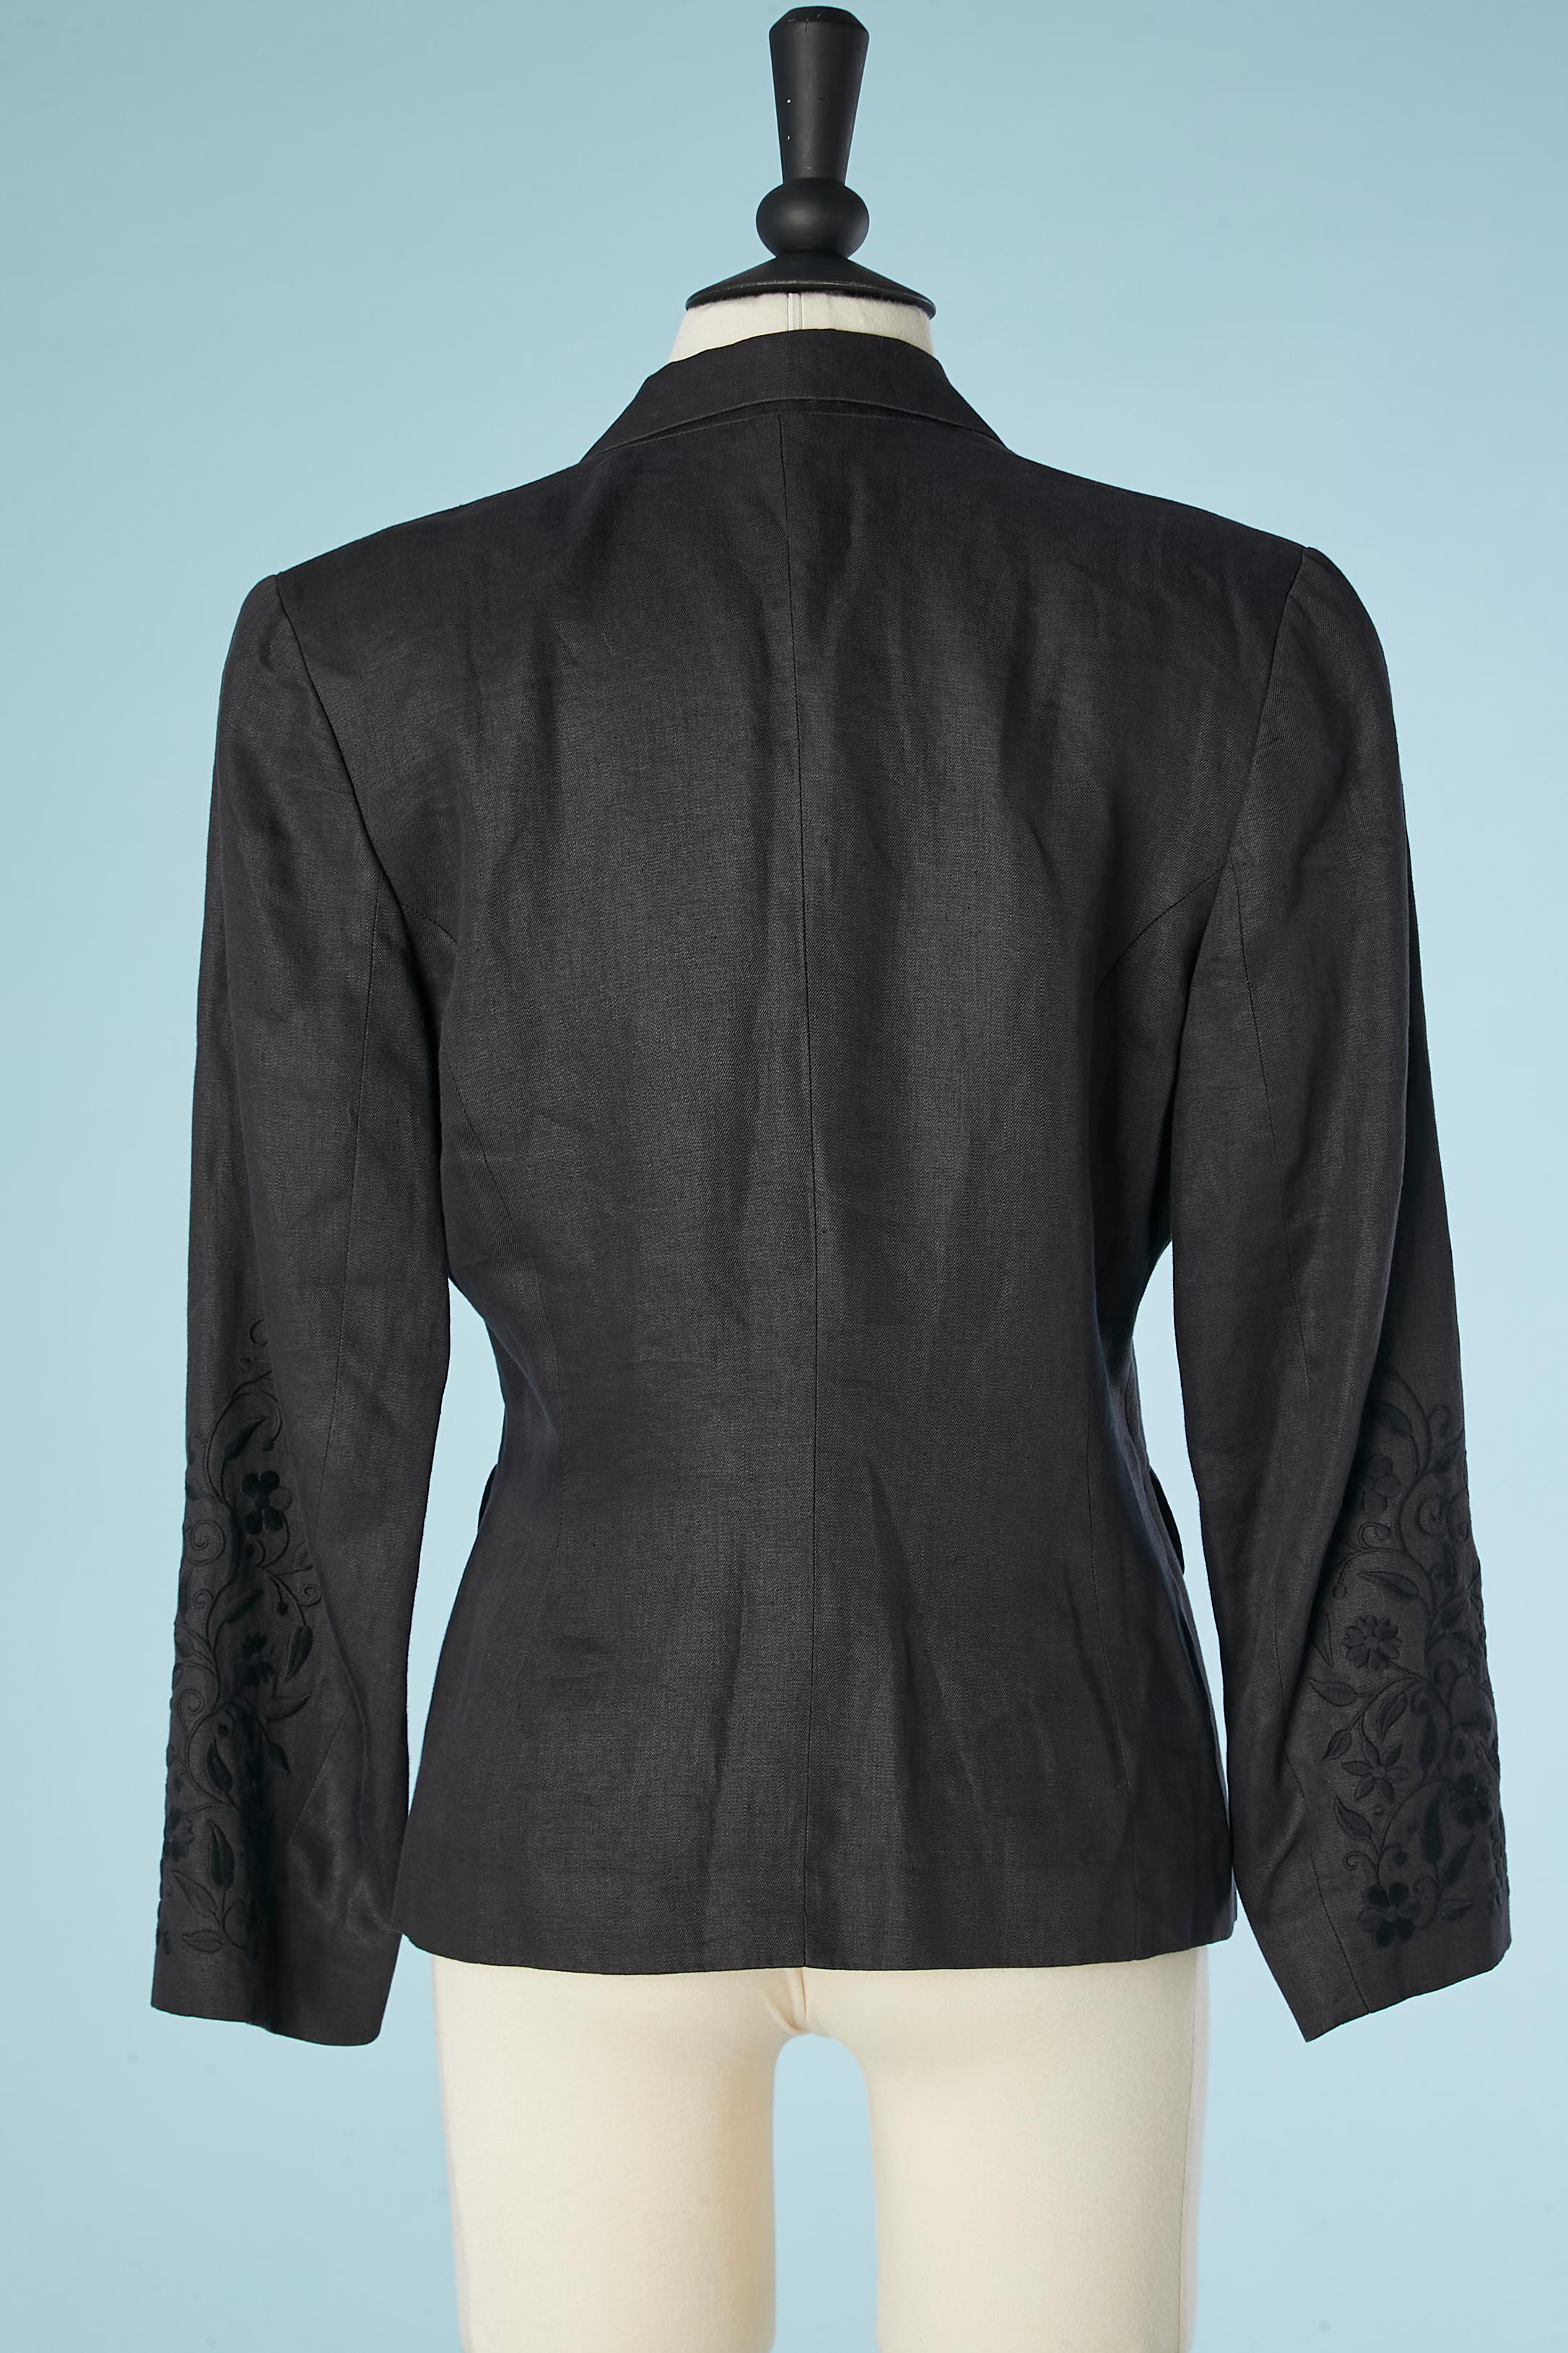 Black linen single breasted jacket with thread embroideries on sleeve KENZO  For Sale 1